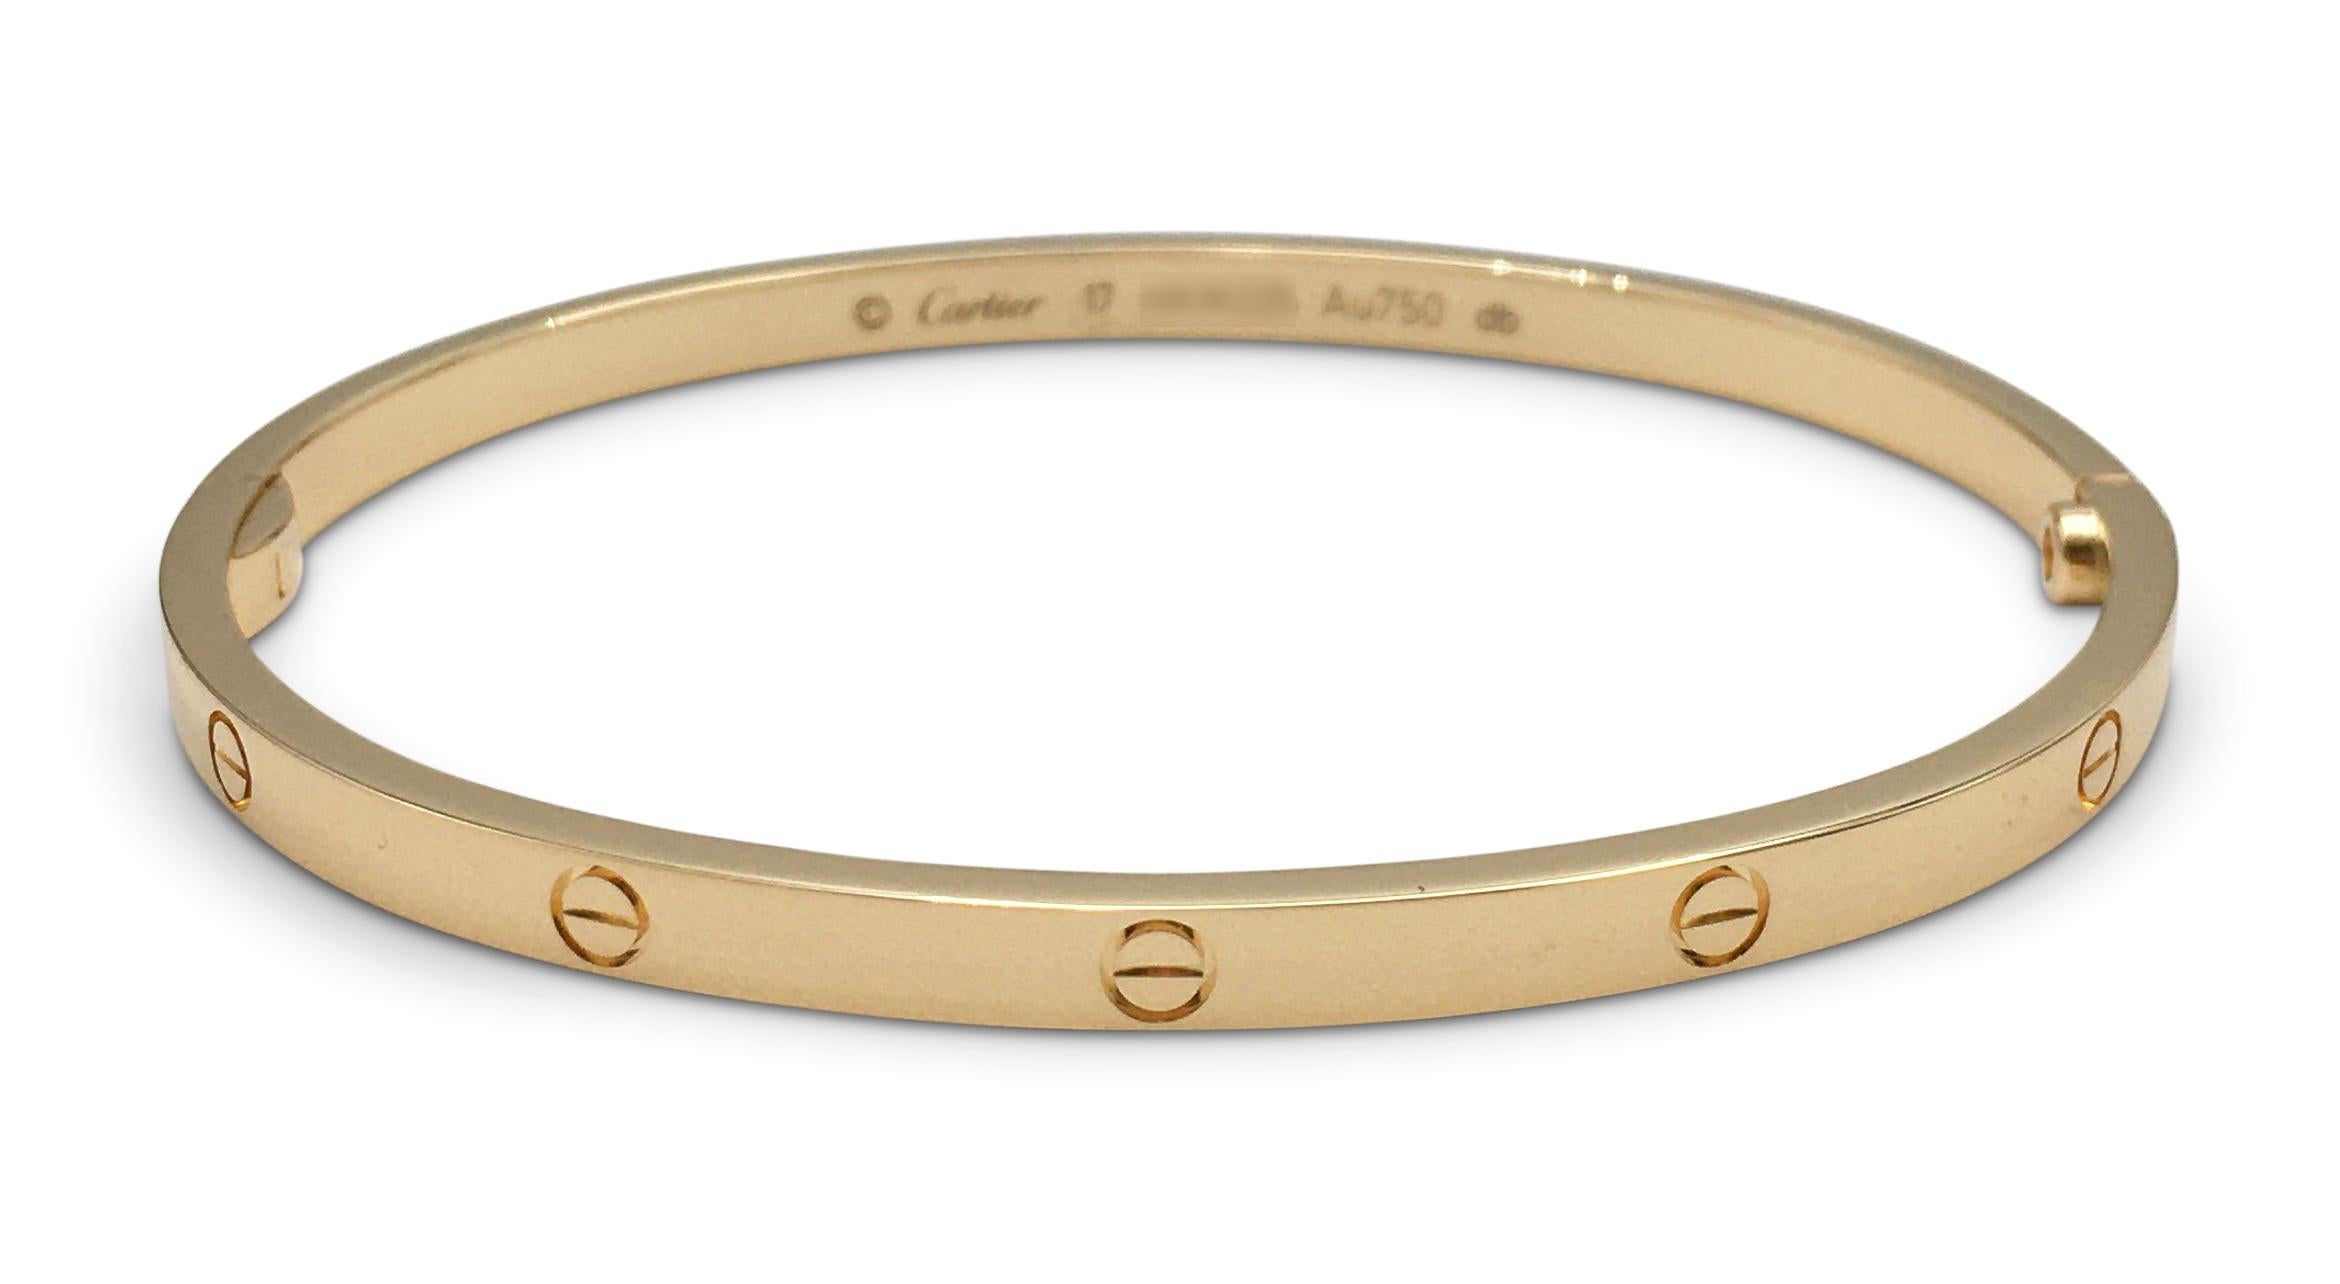 Authentic Cartier 'Love' bracelet crafted in 18 karat yellow gold. Size 17. Signed Cartier, Au750, with serial numbers. The bracelet is presented with the original screwdriver, Cartier papers, and box. CIRCA 2010s.